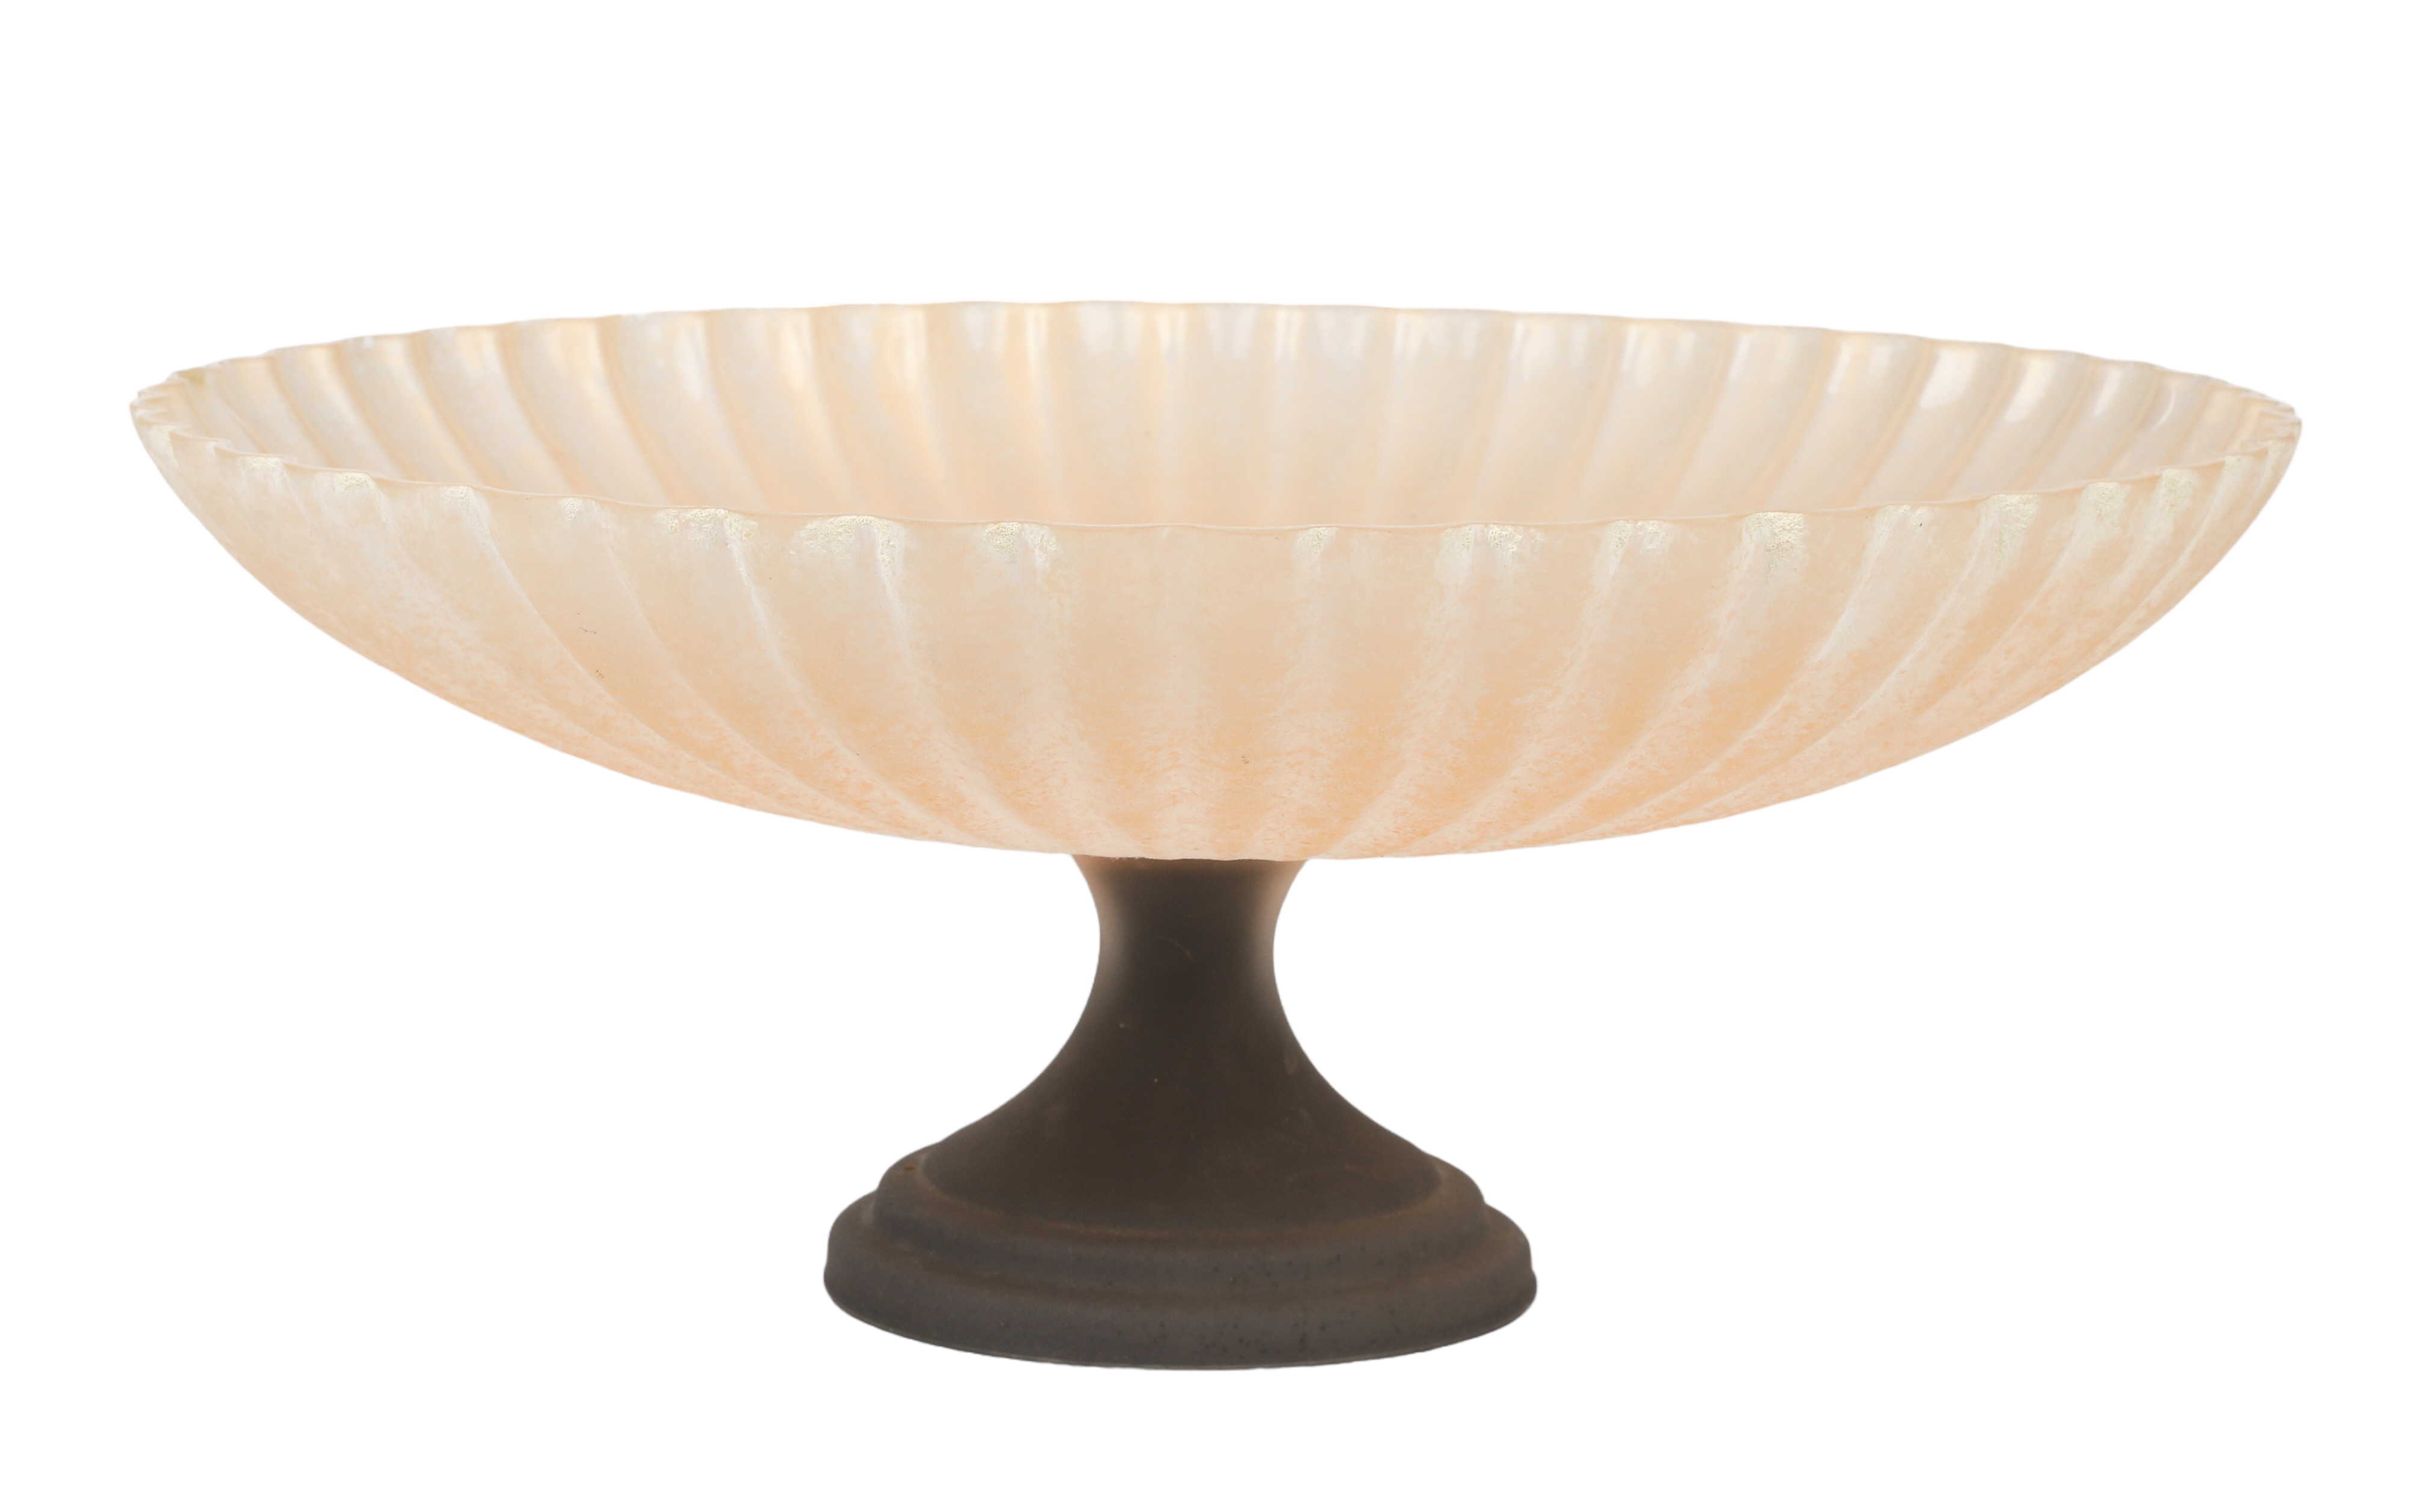 Large art glass compote, 13-3/4"